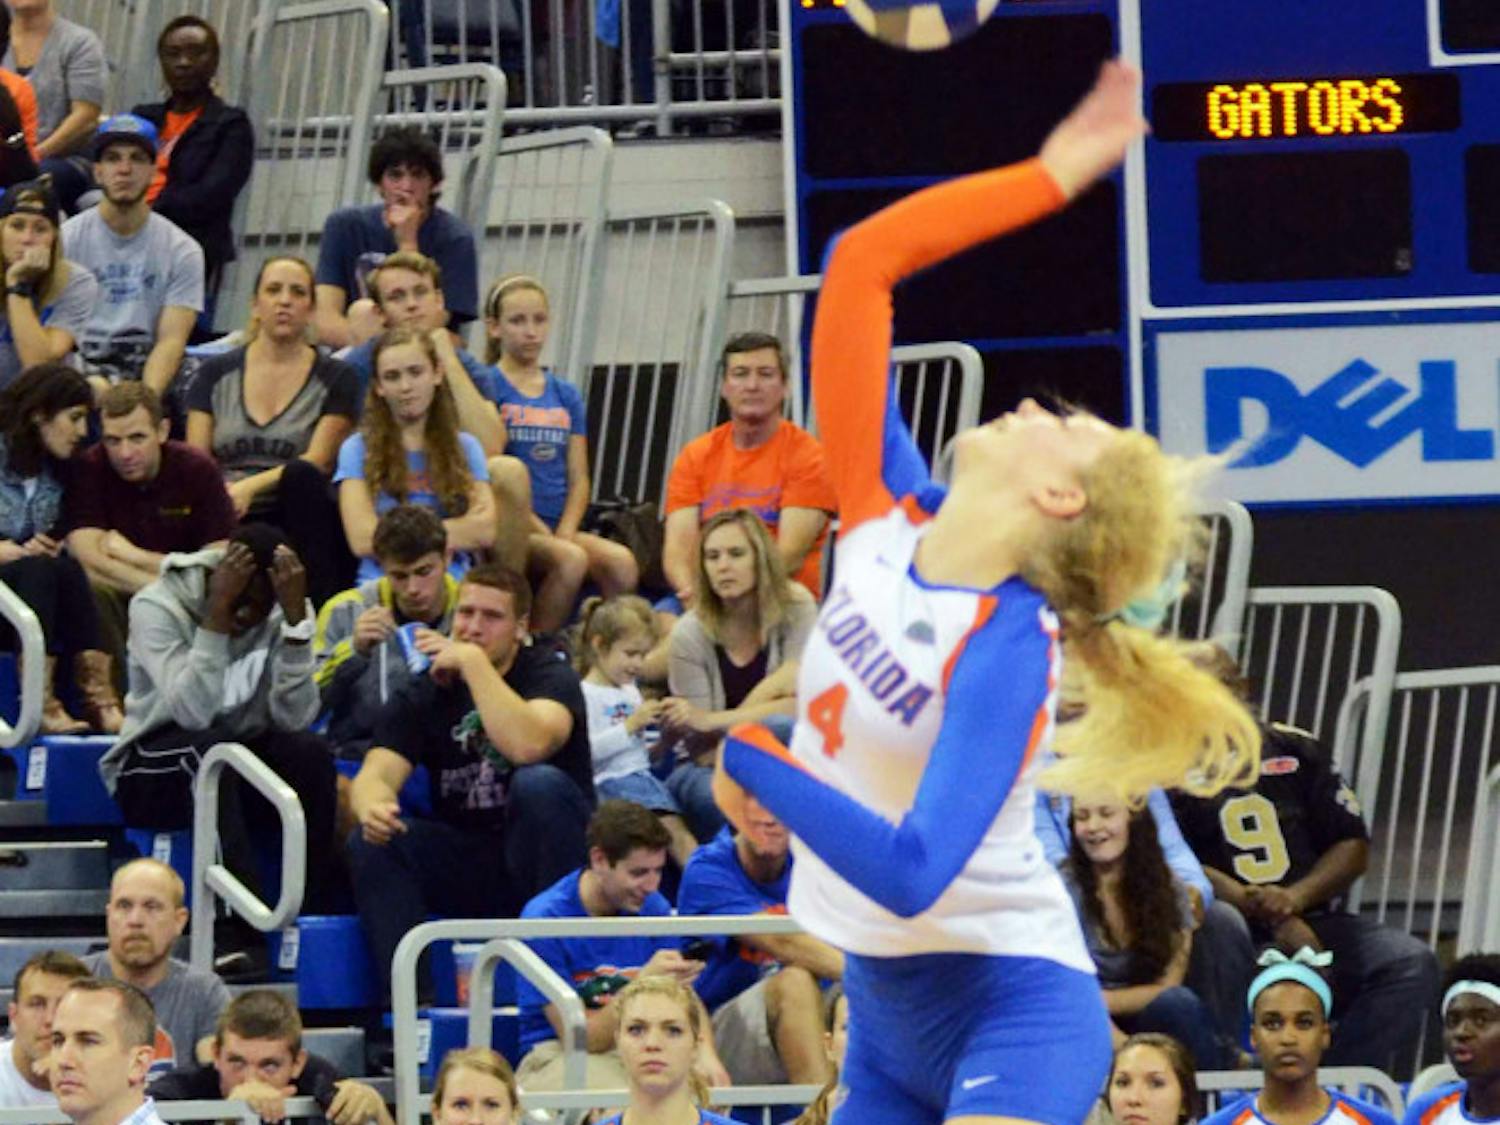 Carli Snyder serves during No. 8 seed Florida's 3-0 win against Alabama State in the first round of the NCAA Tournament on Friday in the O'Connell Center.